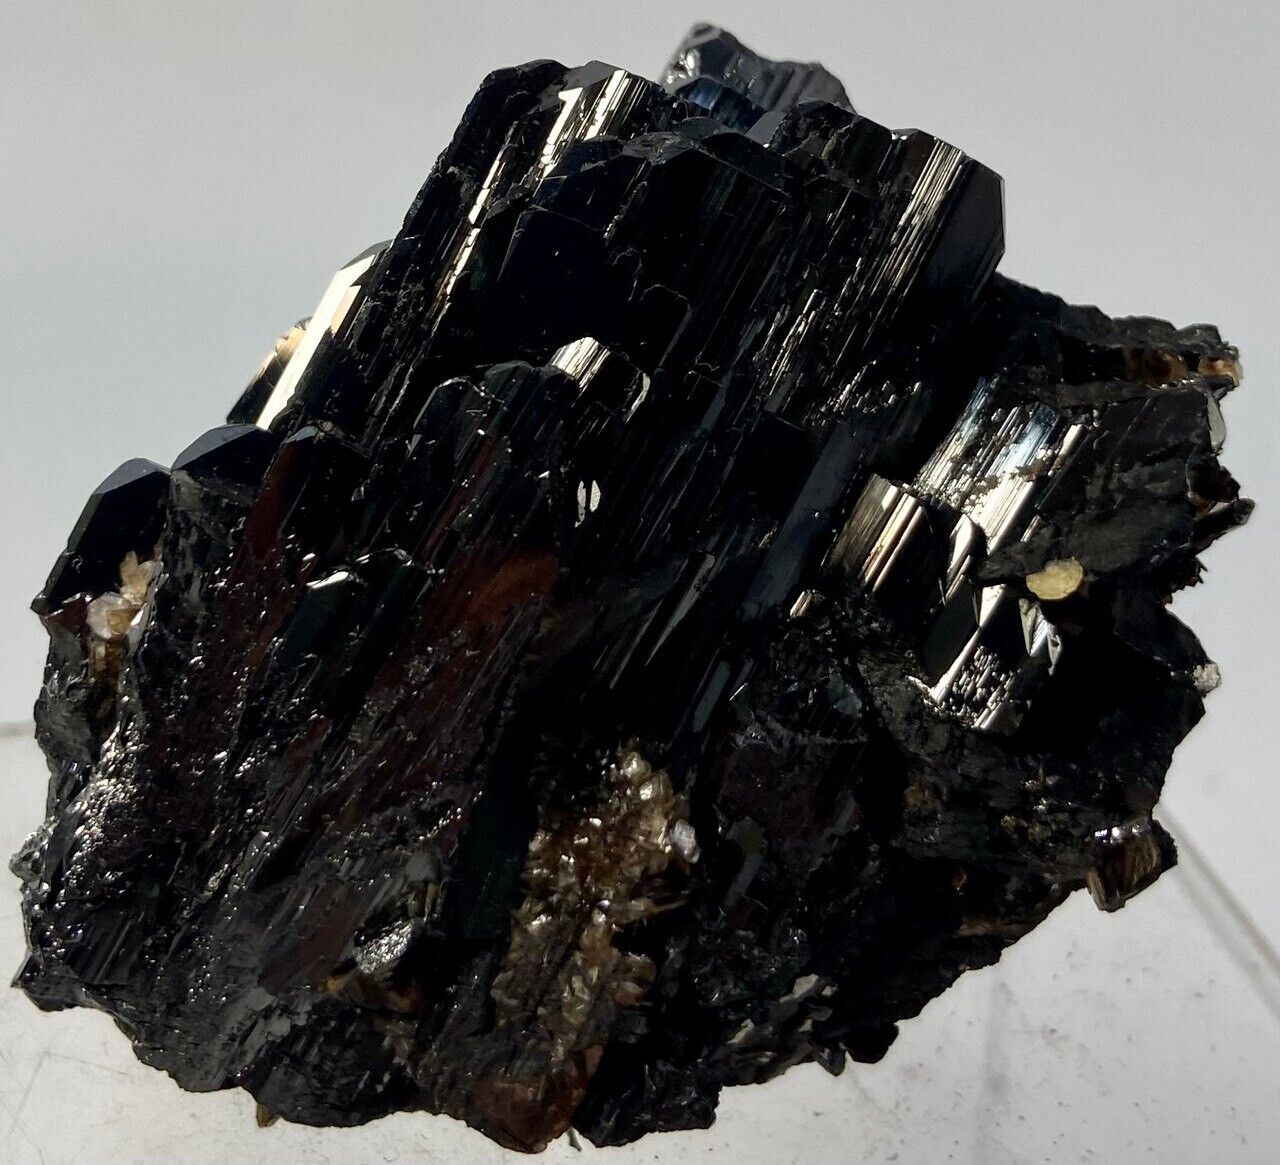 NICE LUSTROUS FERBERITE CRYSTALS: PANASQUEIRA MINES, COVILHÃ, PORTUGAL